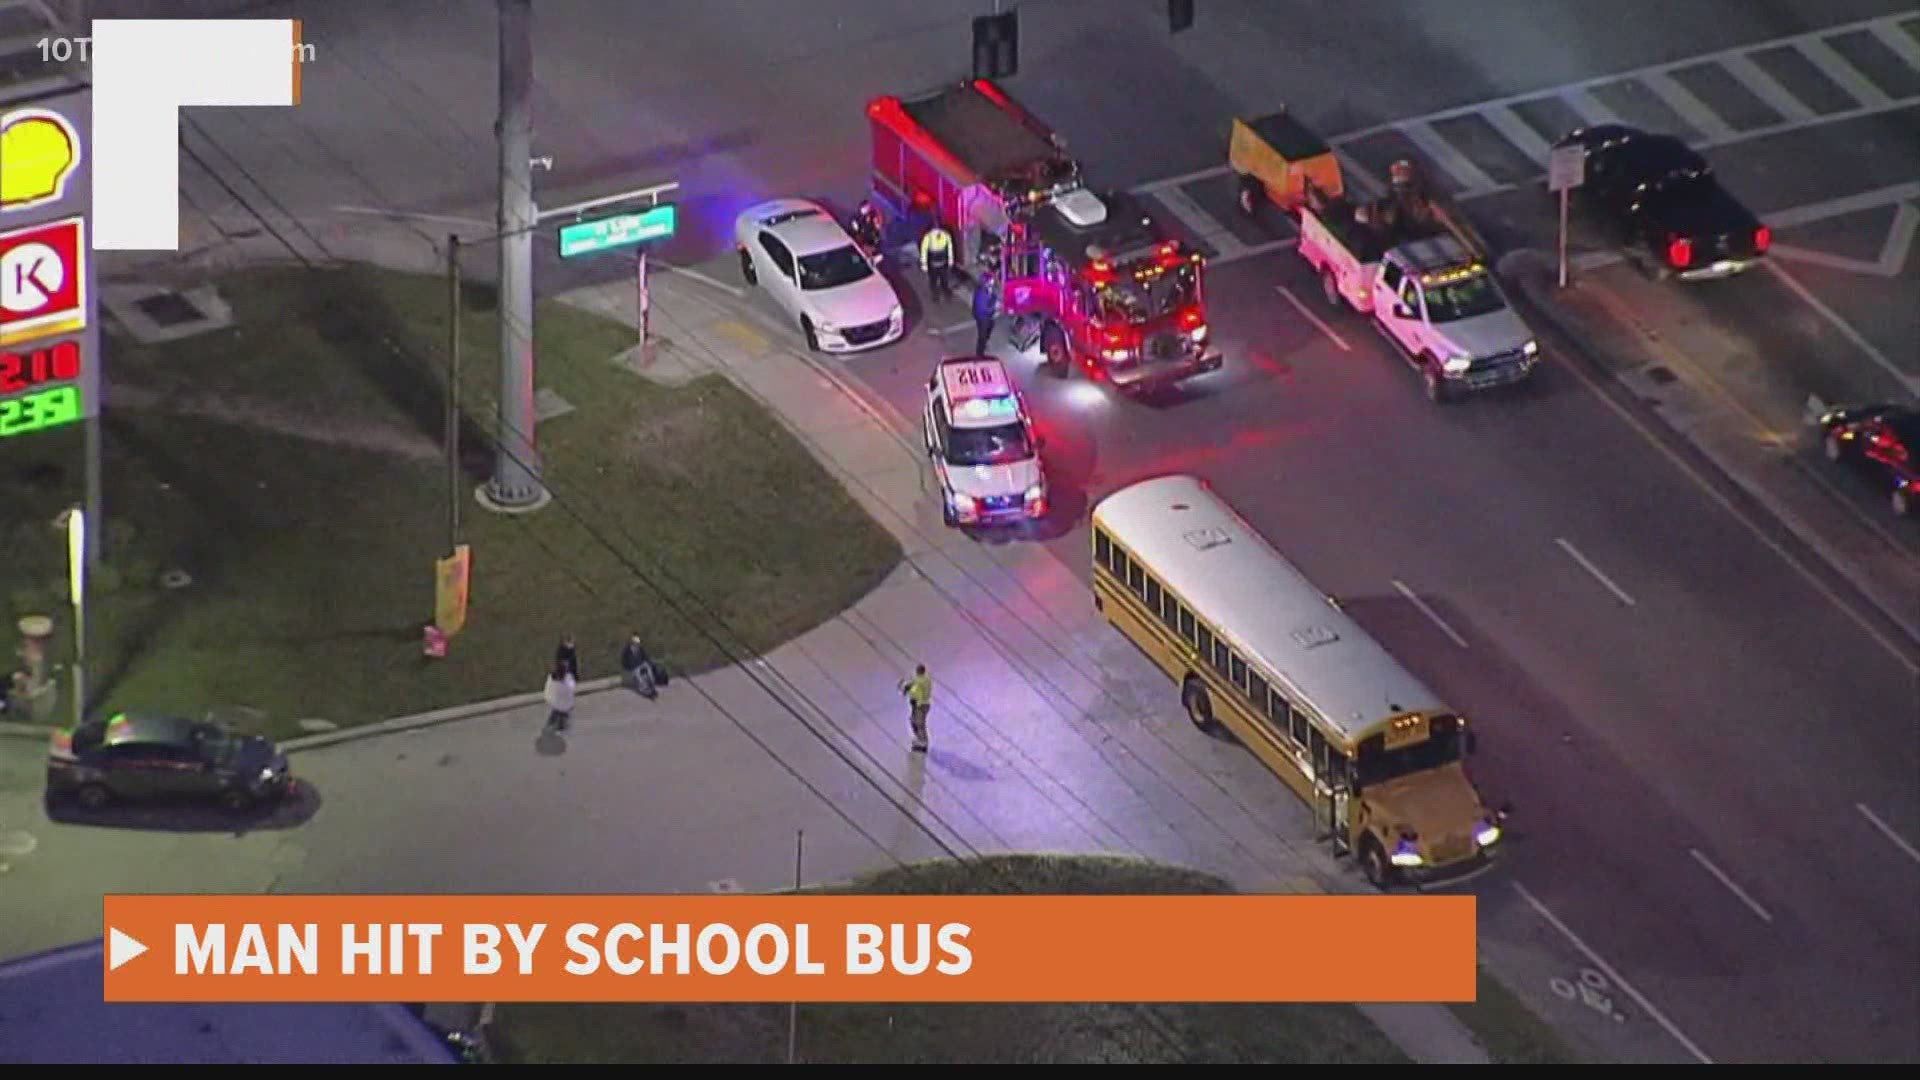 Police say there were no children on the bus at the time of the crash.